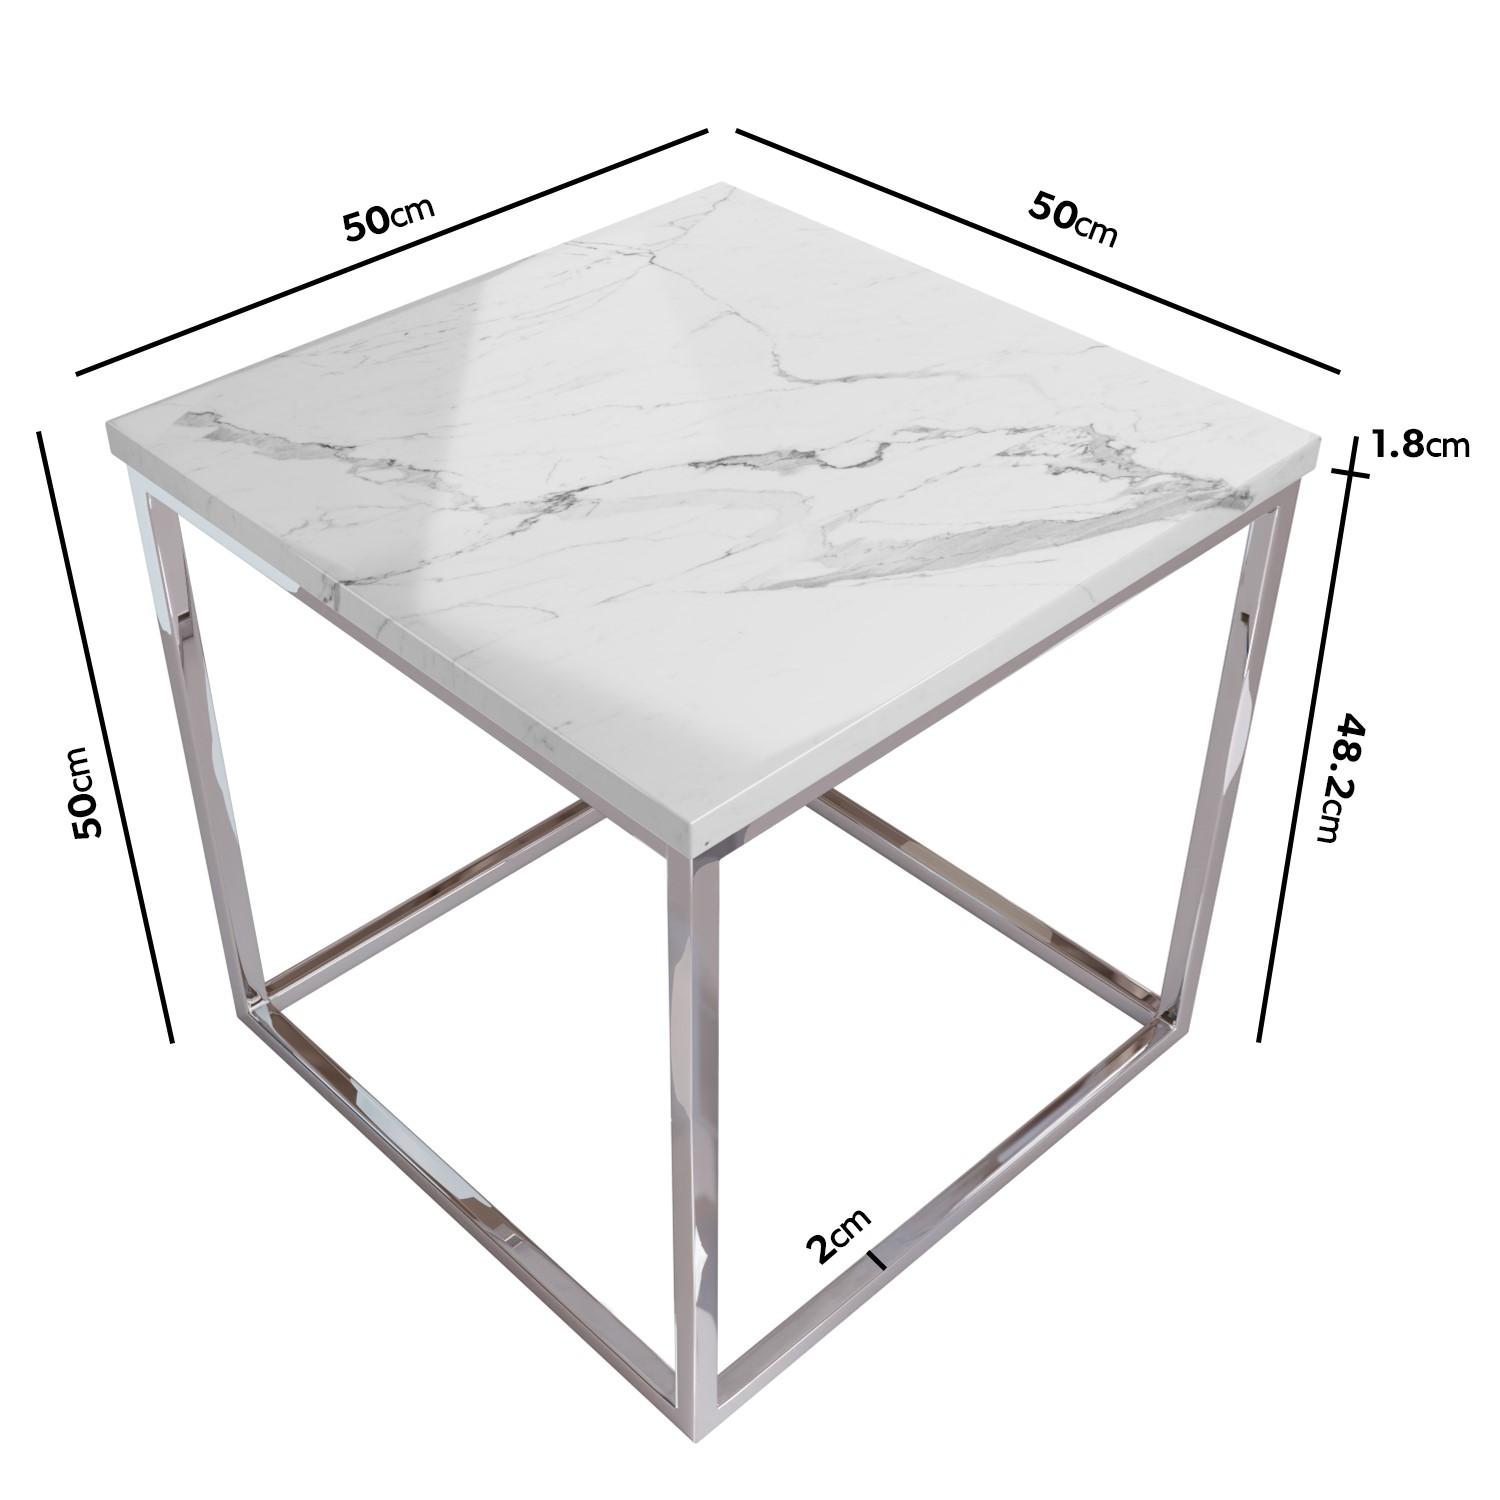 Read more about Square white marble effect top side table with chrome legs demi